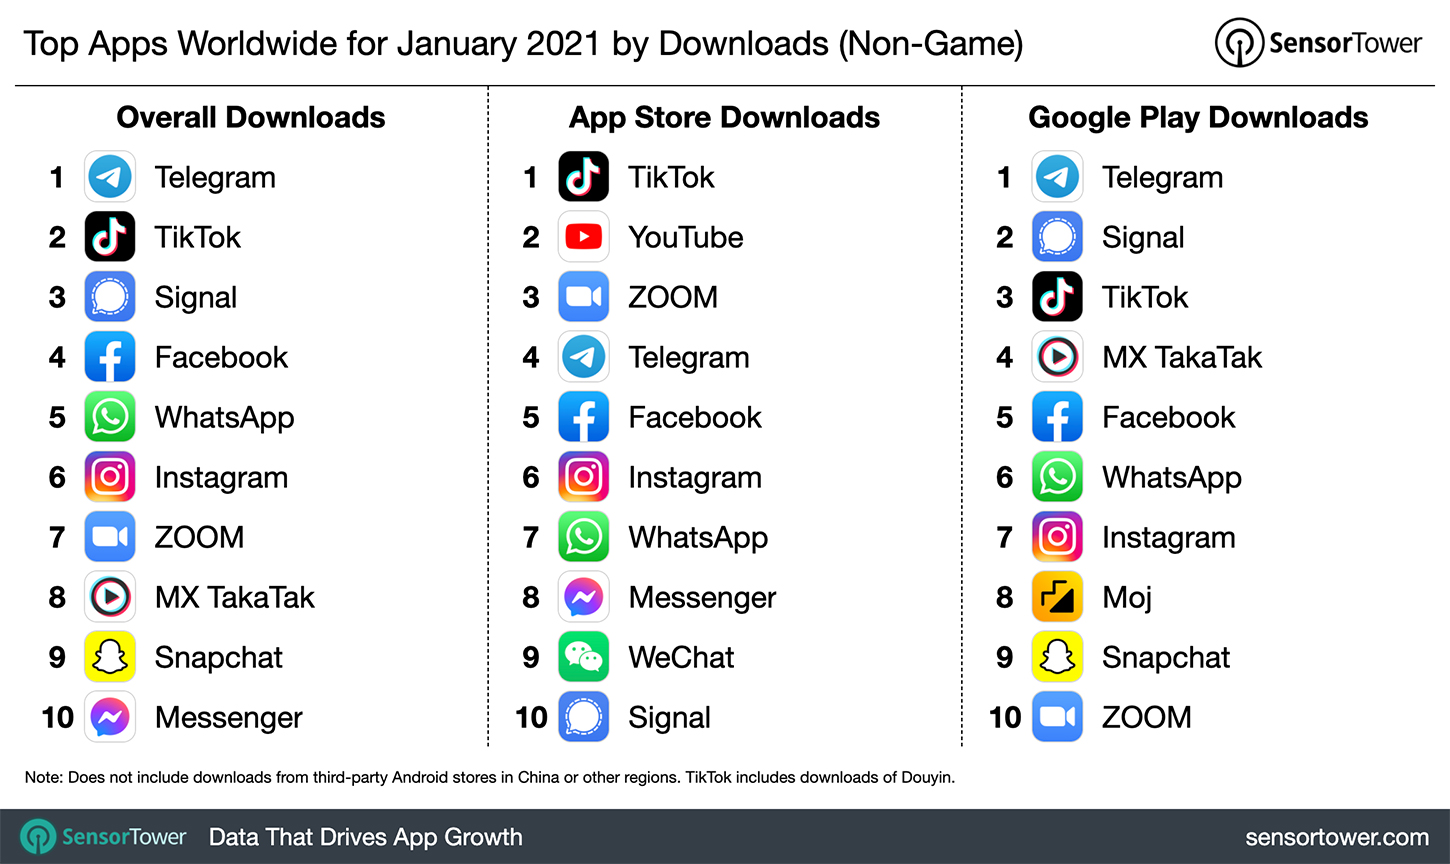 Top Apps Worldwide for January 2021 by Downloads